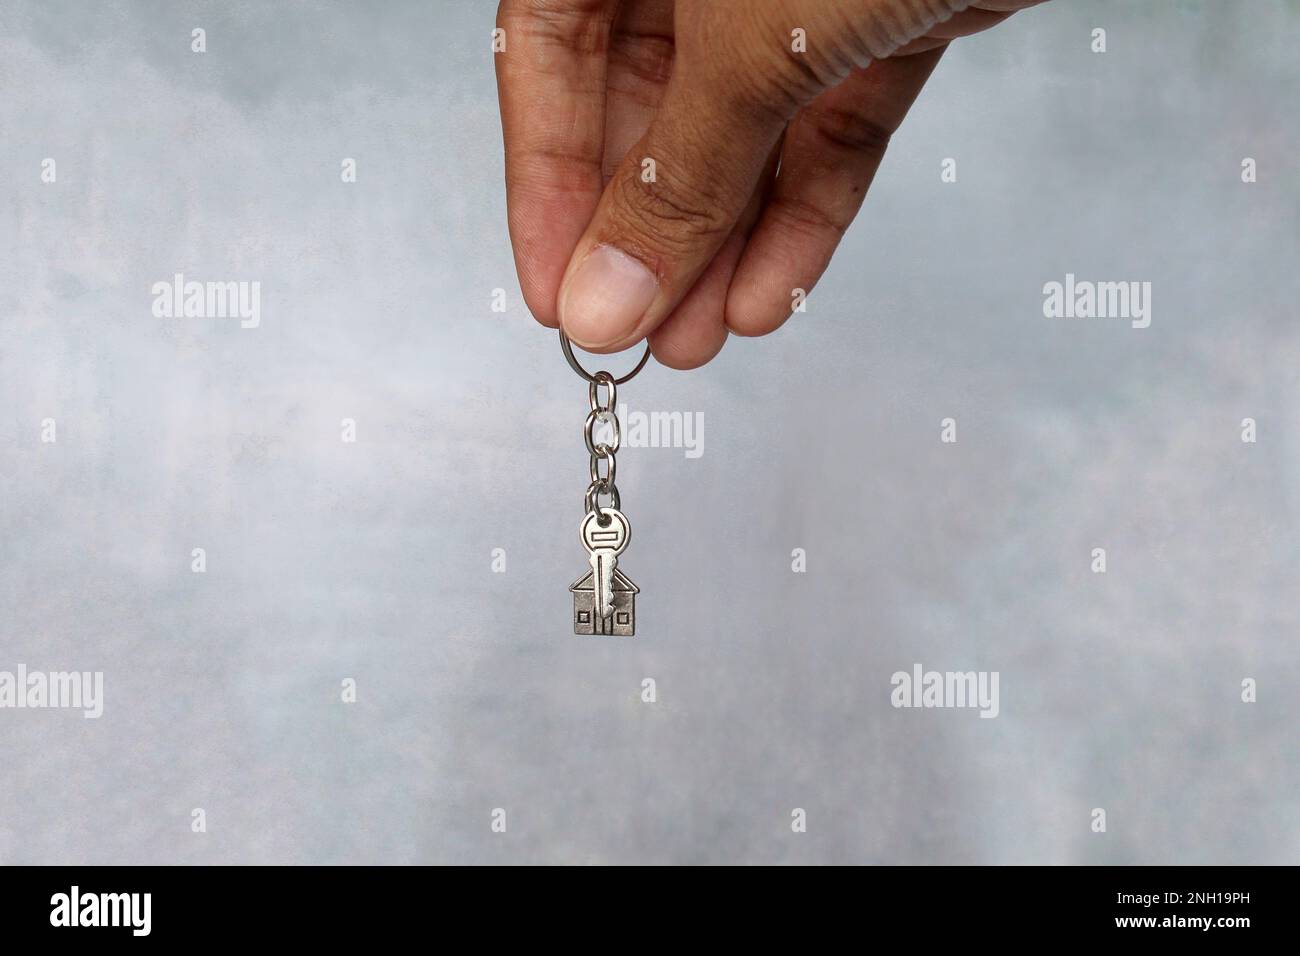 Hand holding house shaped keychain and key with copy space. Home ownership concept. Stock Photo